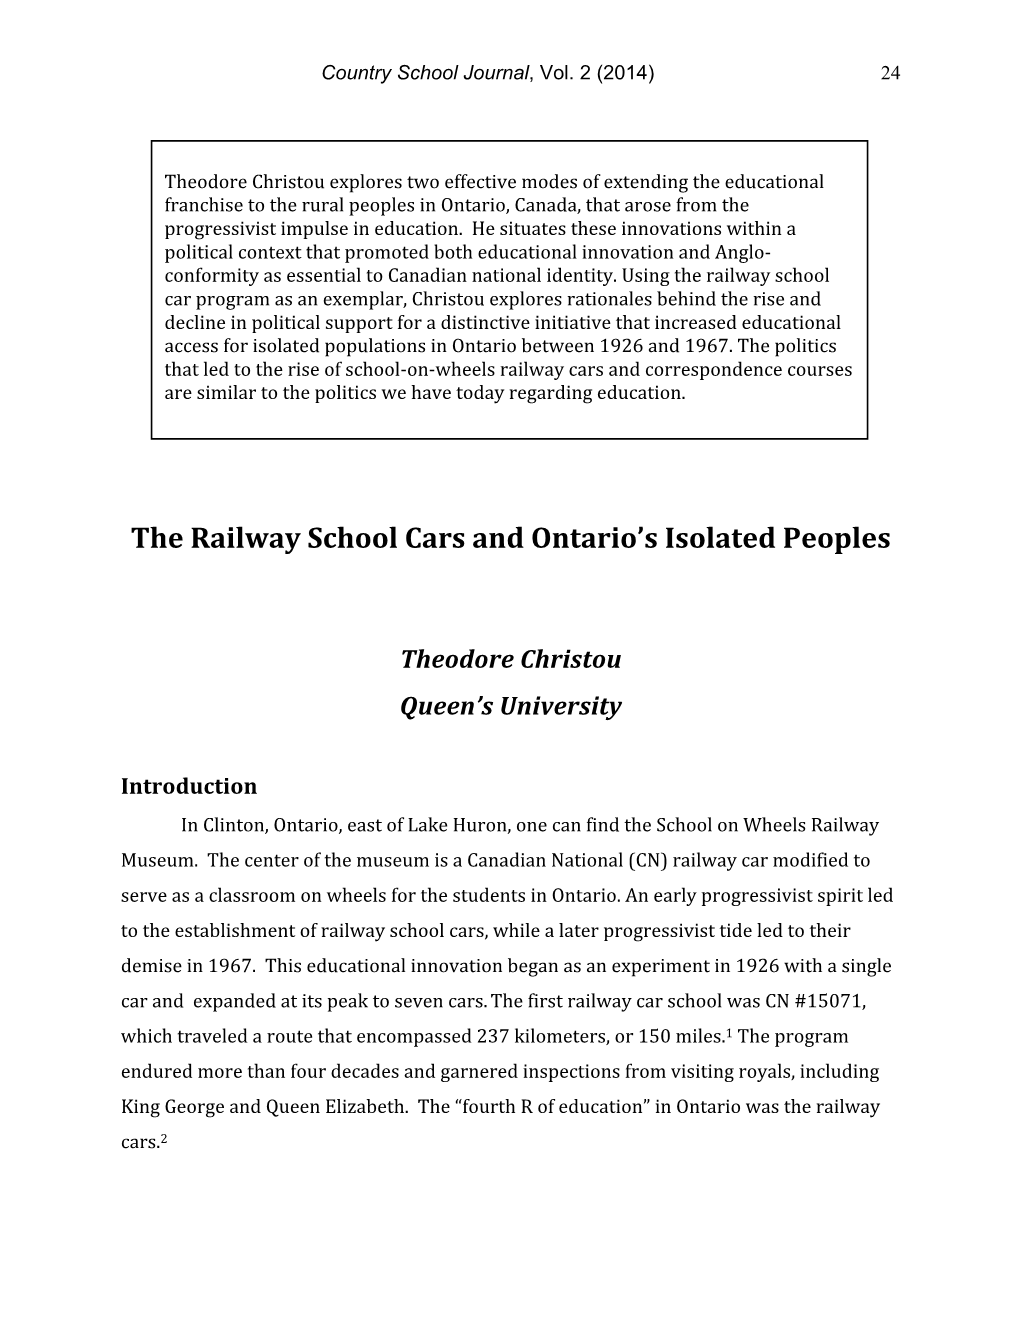 The Railway School Cars and Ontario's Isolated Peoples